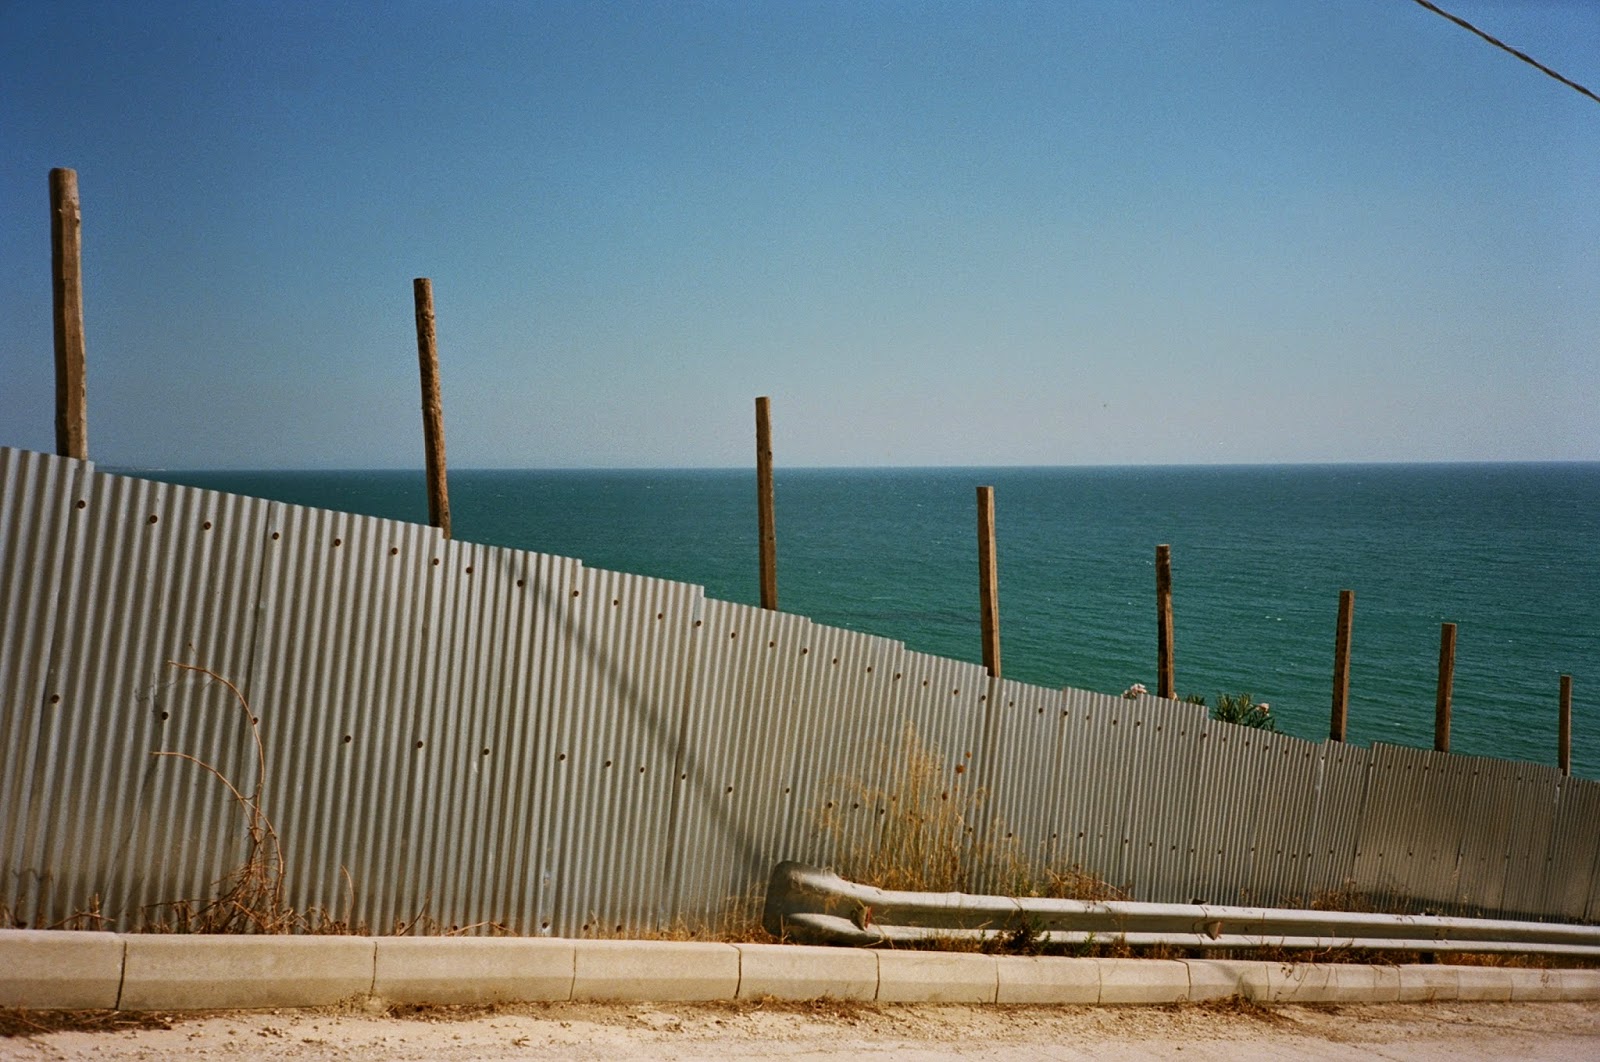 CORRUGATED SHEET METAL, BARACADE, DEVELOPMENT SITE, COASTAL VIEW IN SOUTHERN SICILY, AGRIGENTO, SCIACCA, SICILY © VAC 100 DAYS 4 MILLION CONVERSATIONS